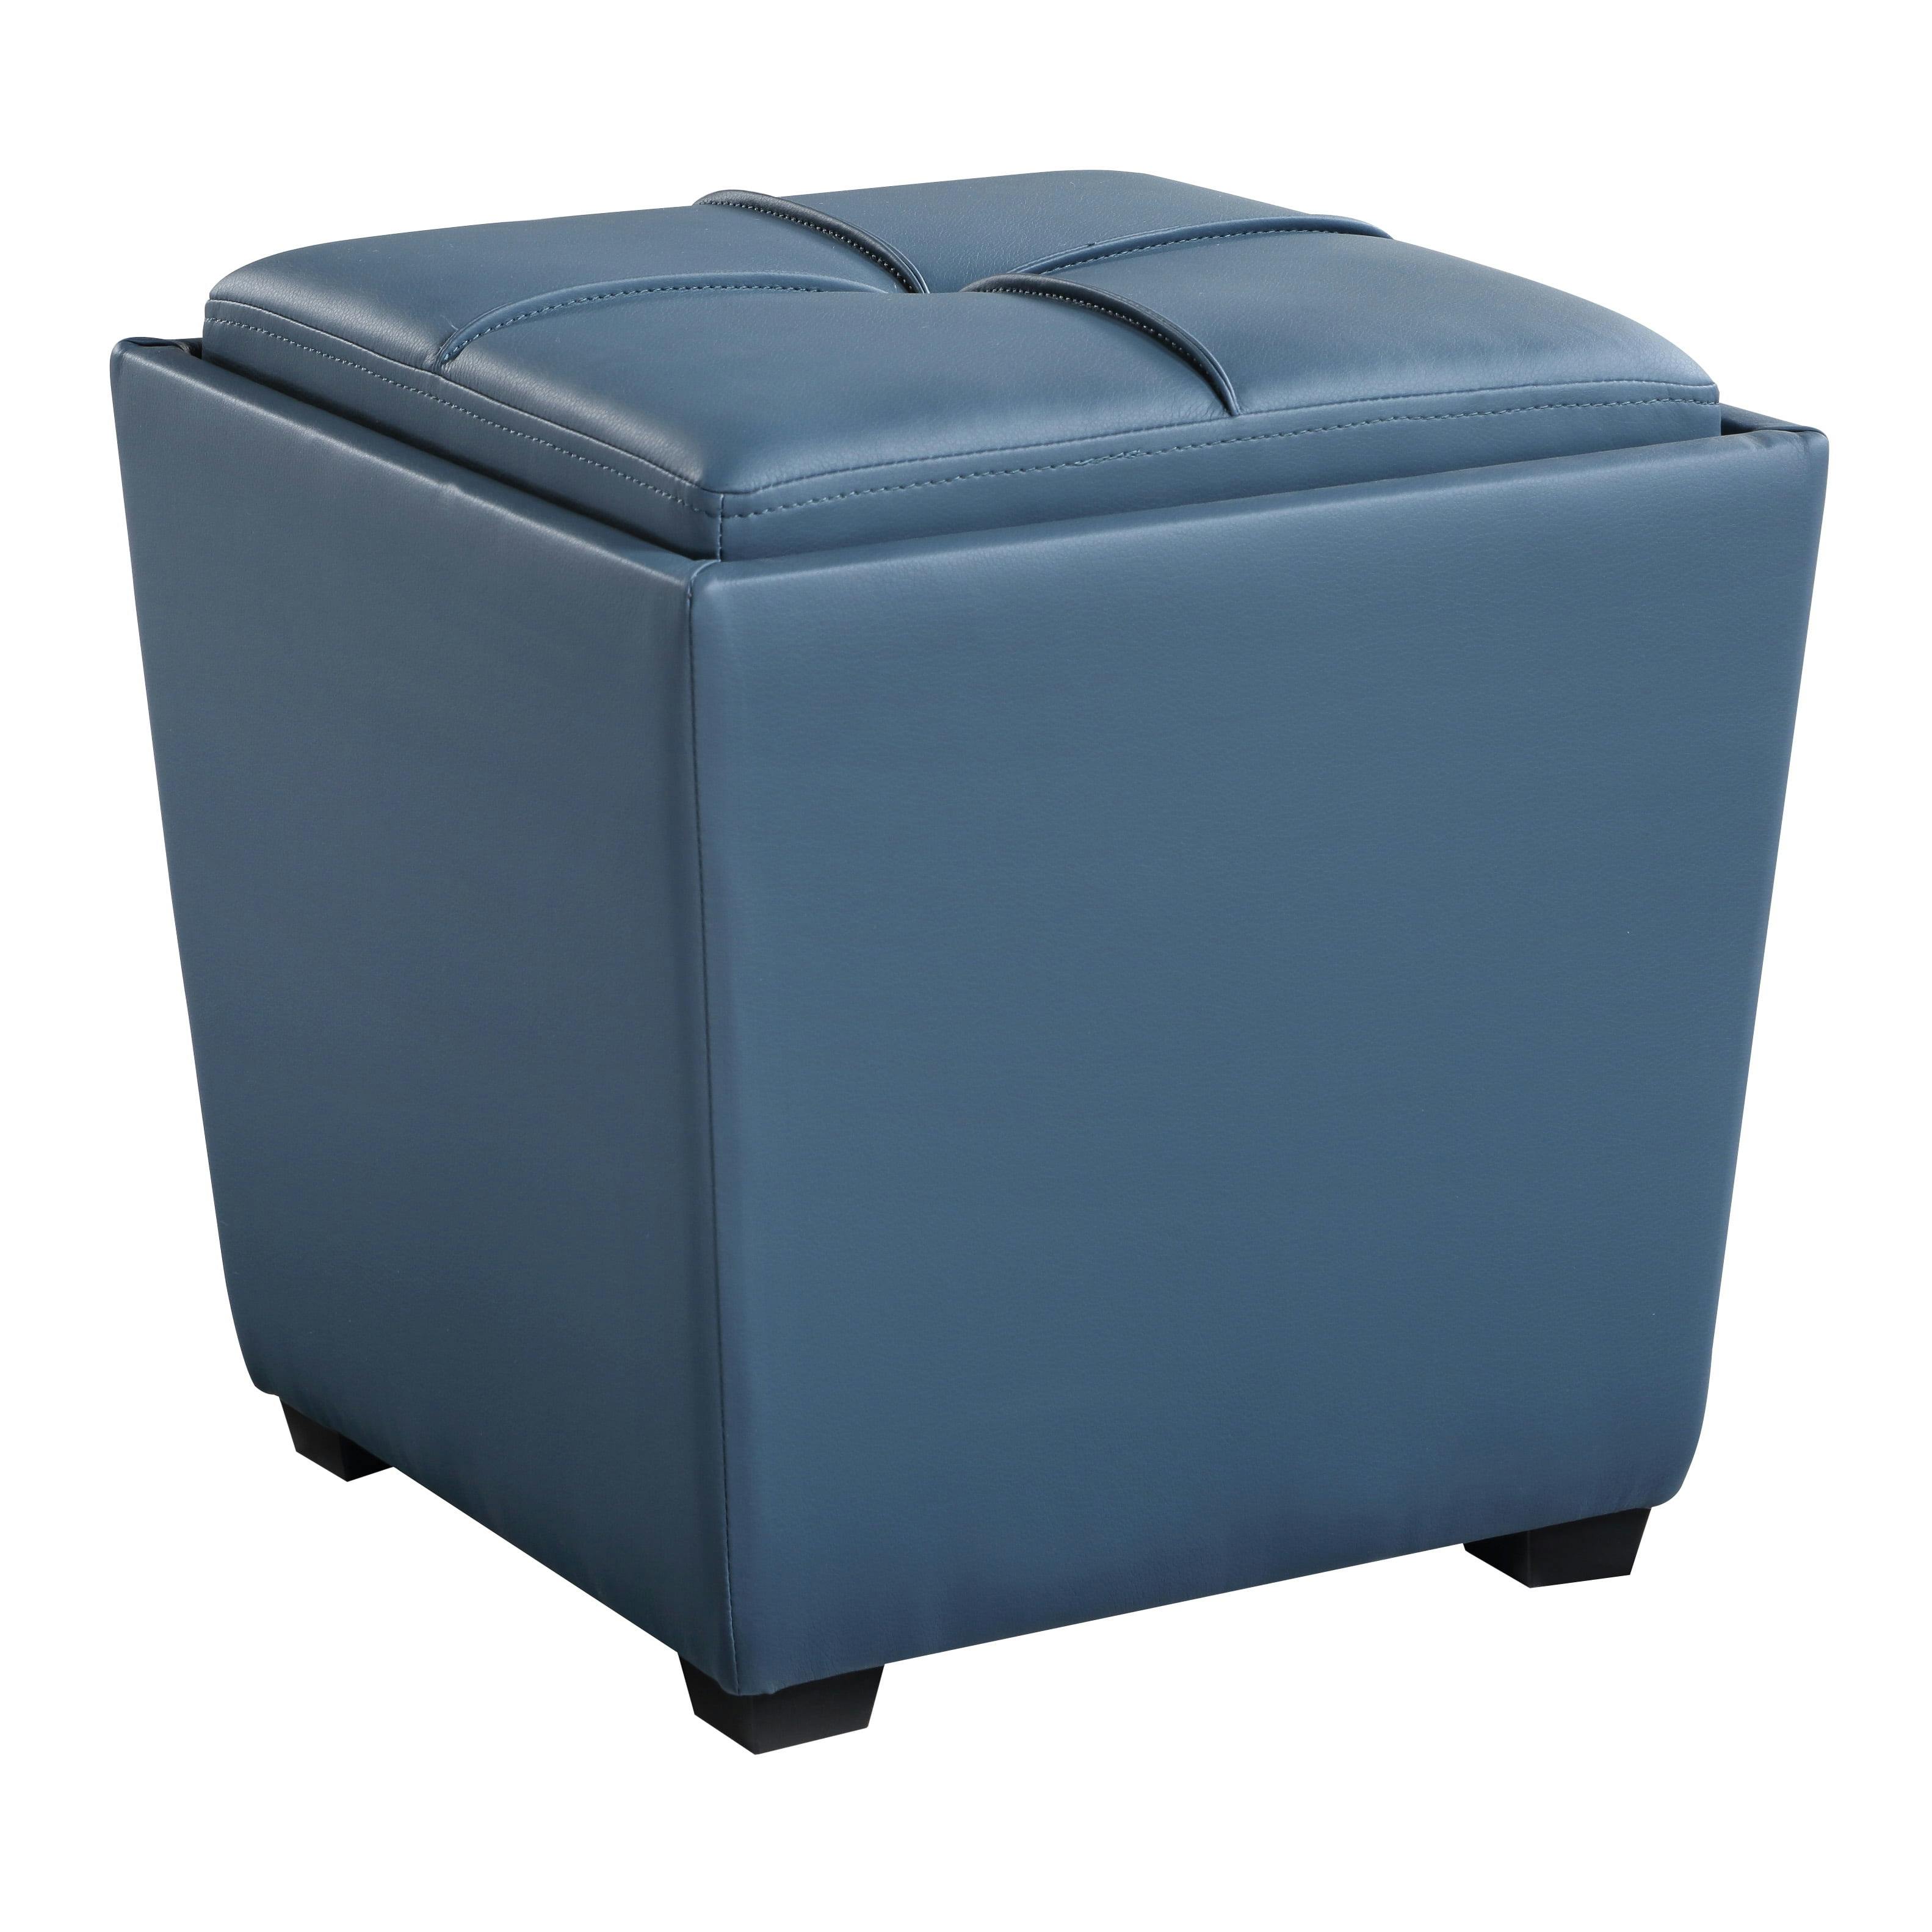 Slate Blue Tufted Faux Leather Storage Ottoman with Tray